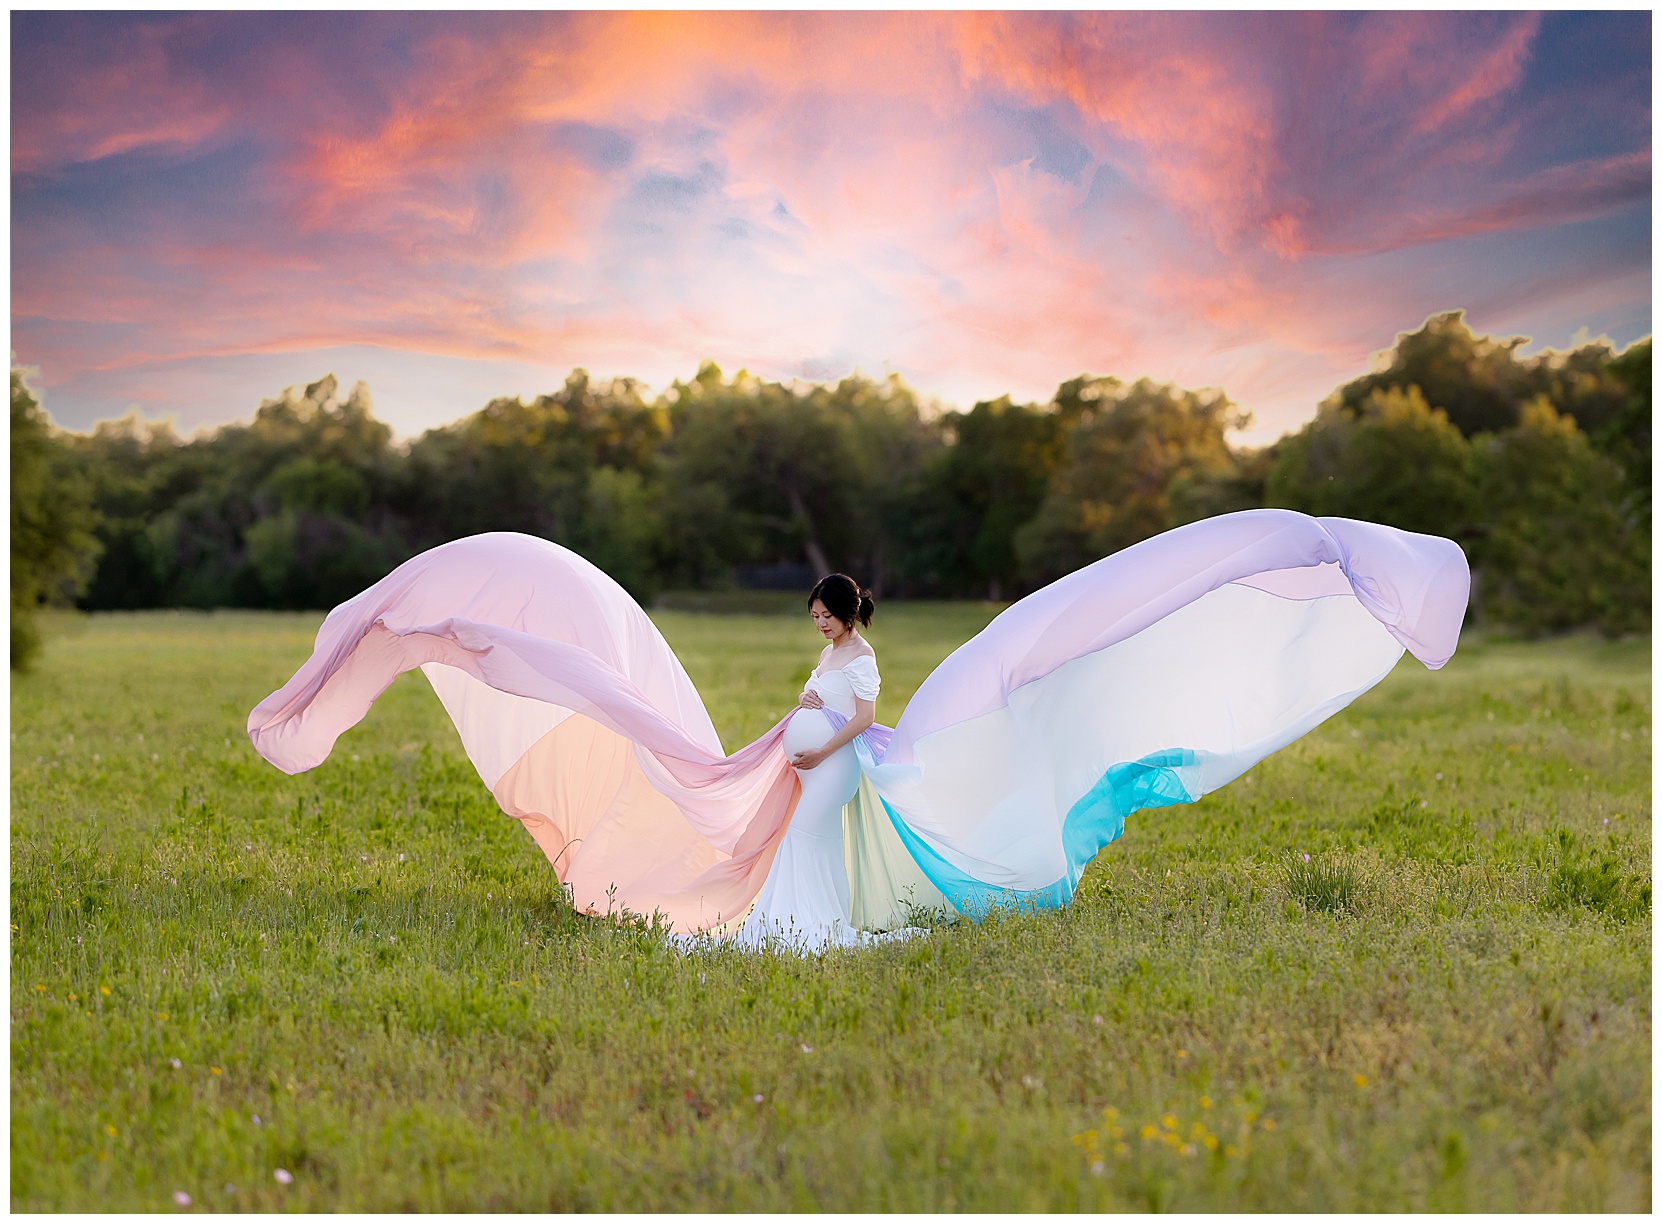 Woman in a rainbow maternity gown standing in a field of wildflowers in front of a sunset